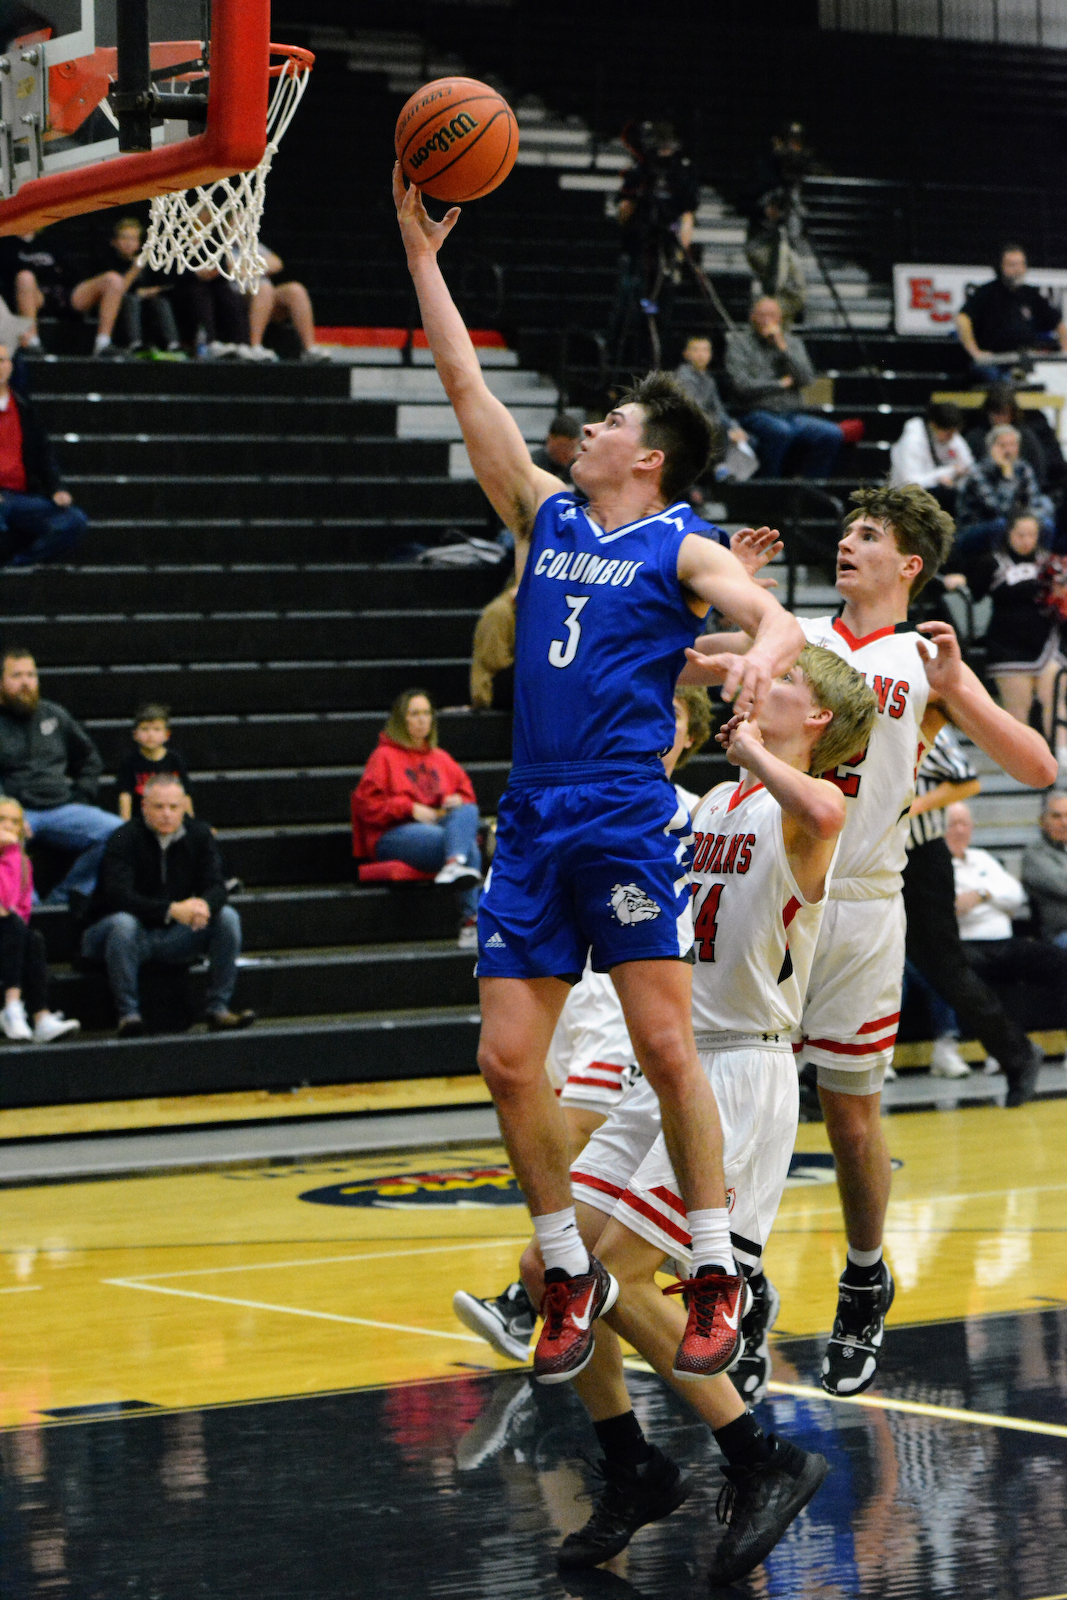 Bull Dogs roll over East Central in boys basketball cover photo